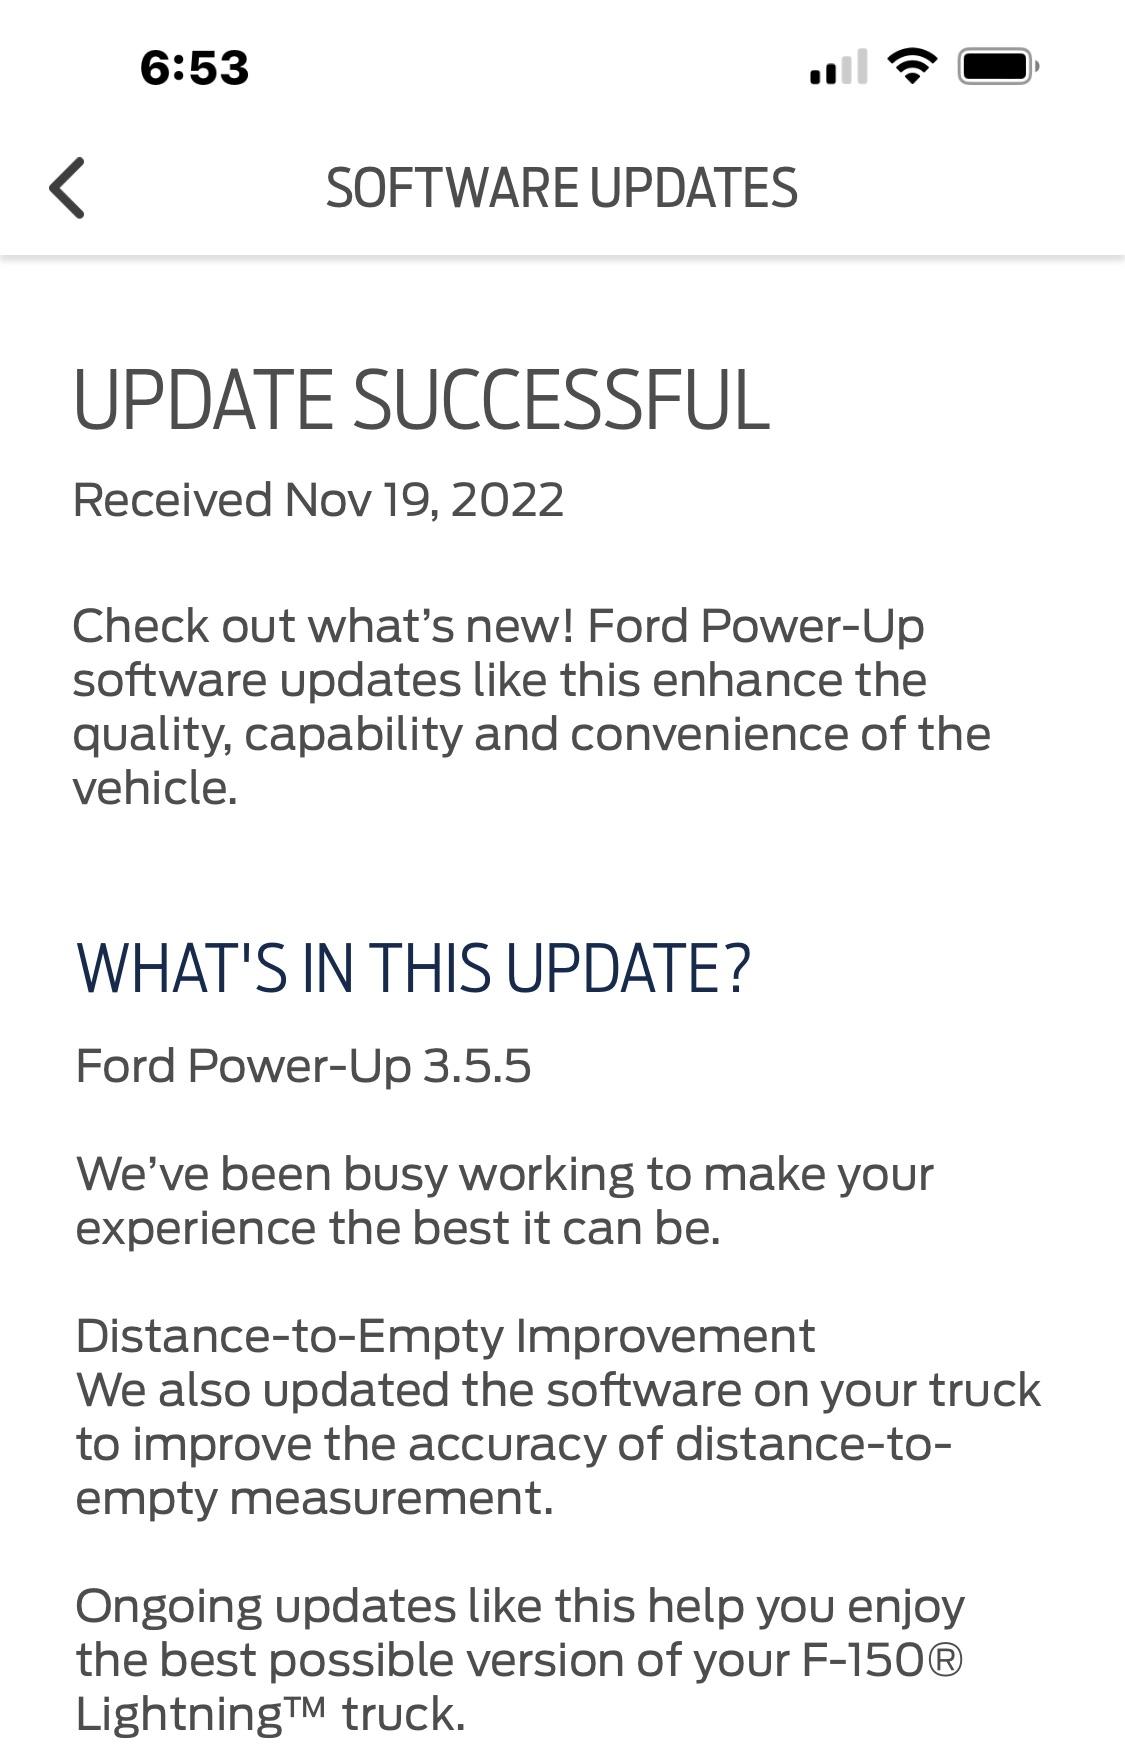 Ford F-150 Lightning Priority Update: 22-PU-1009-MIL-DTE Calculation Screenshot 2022-11-19 at 6.53.57 AM